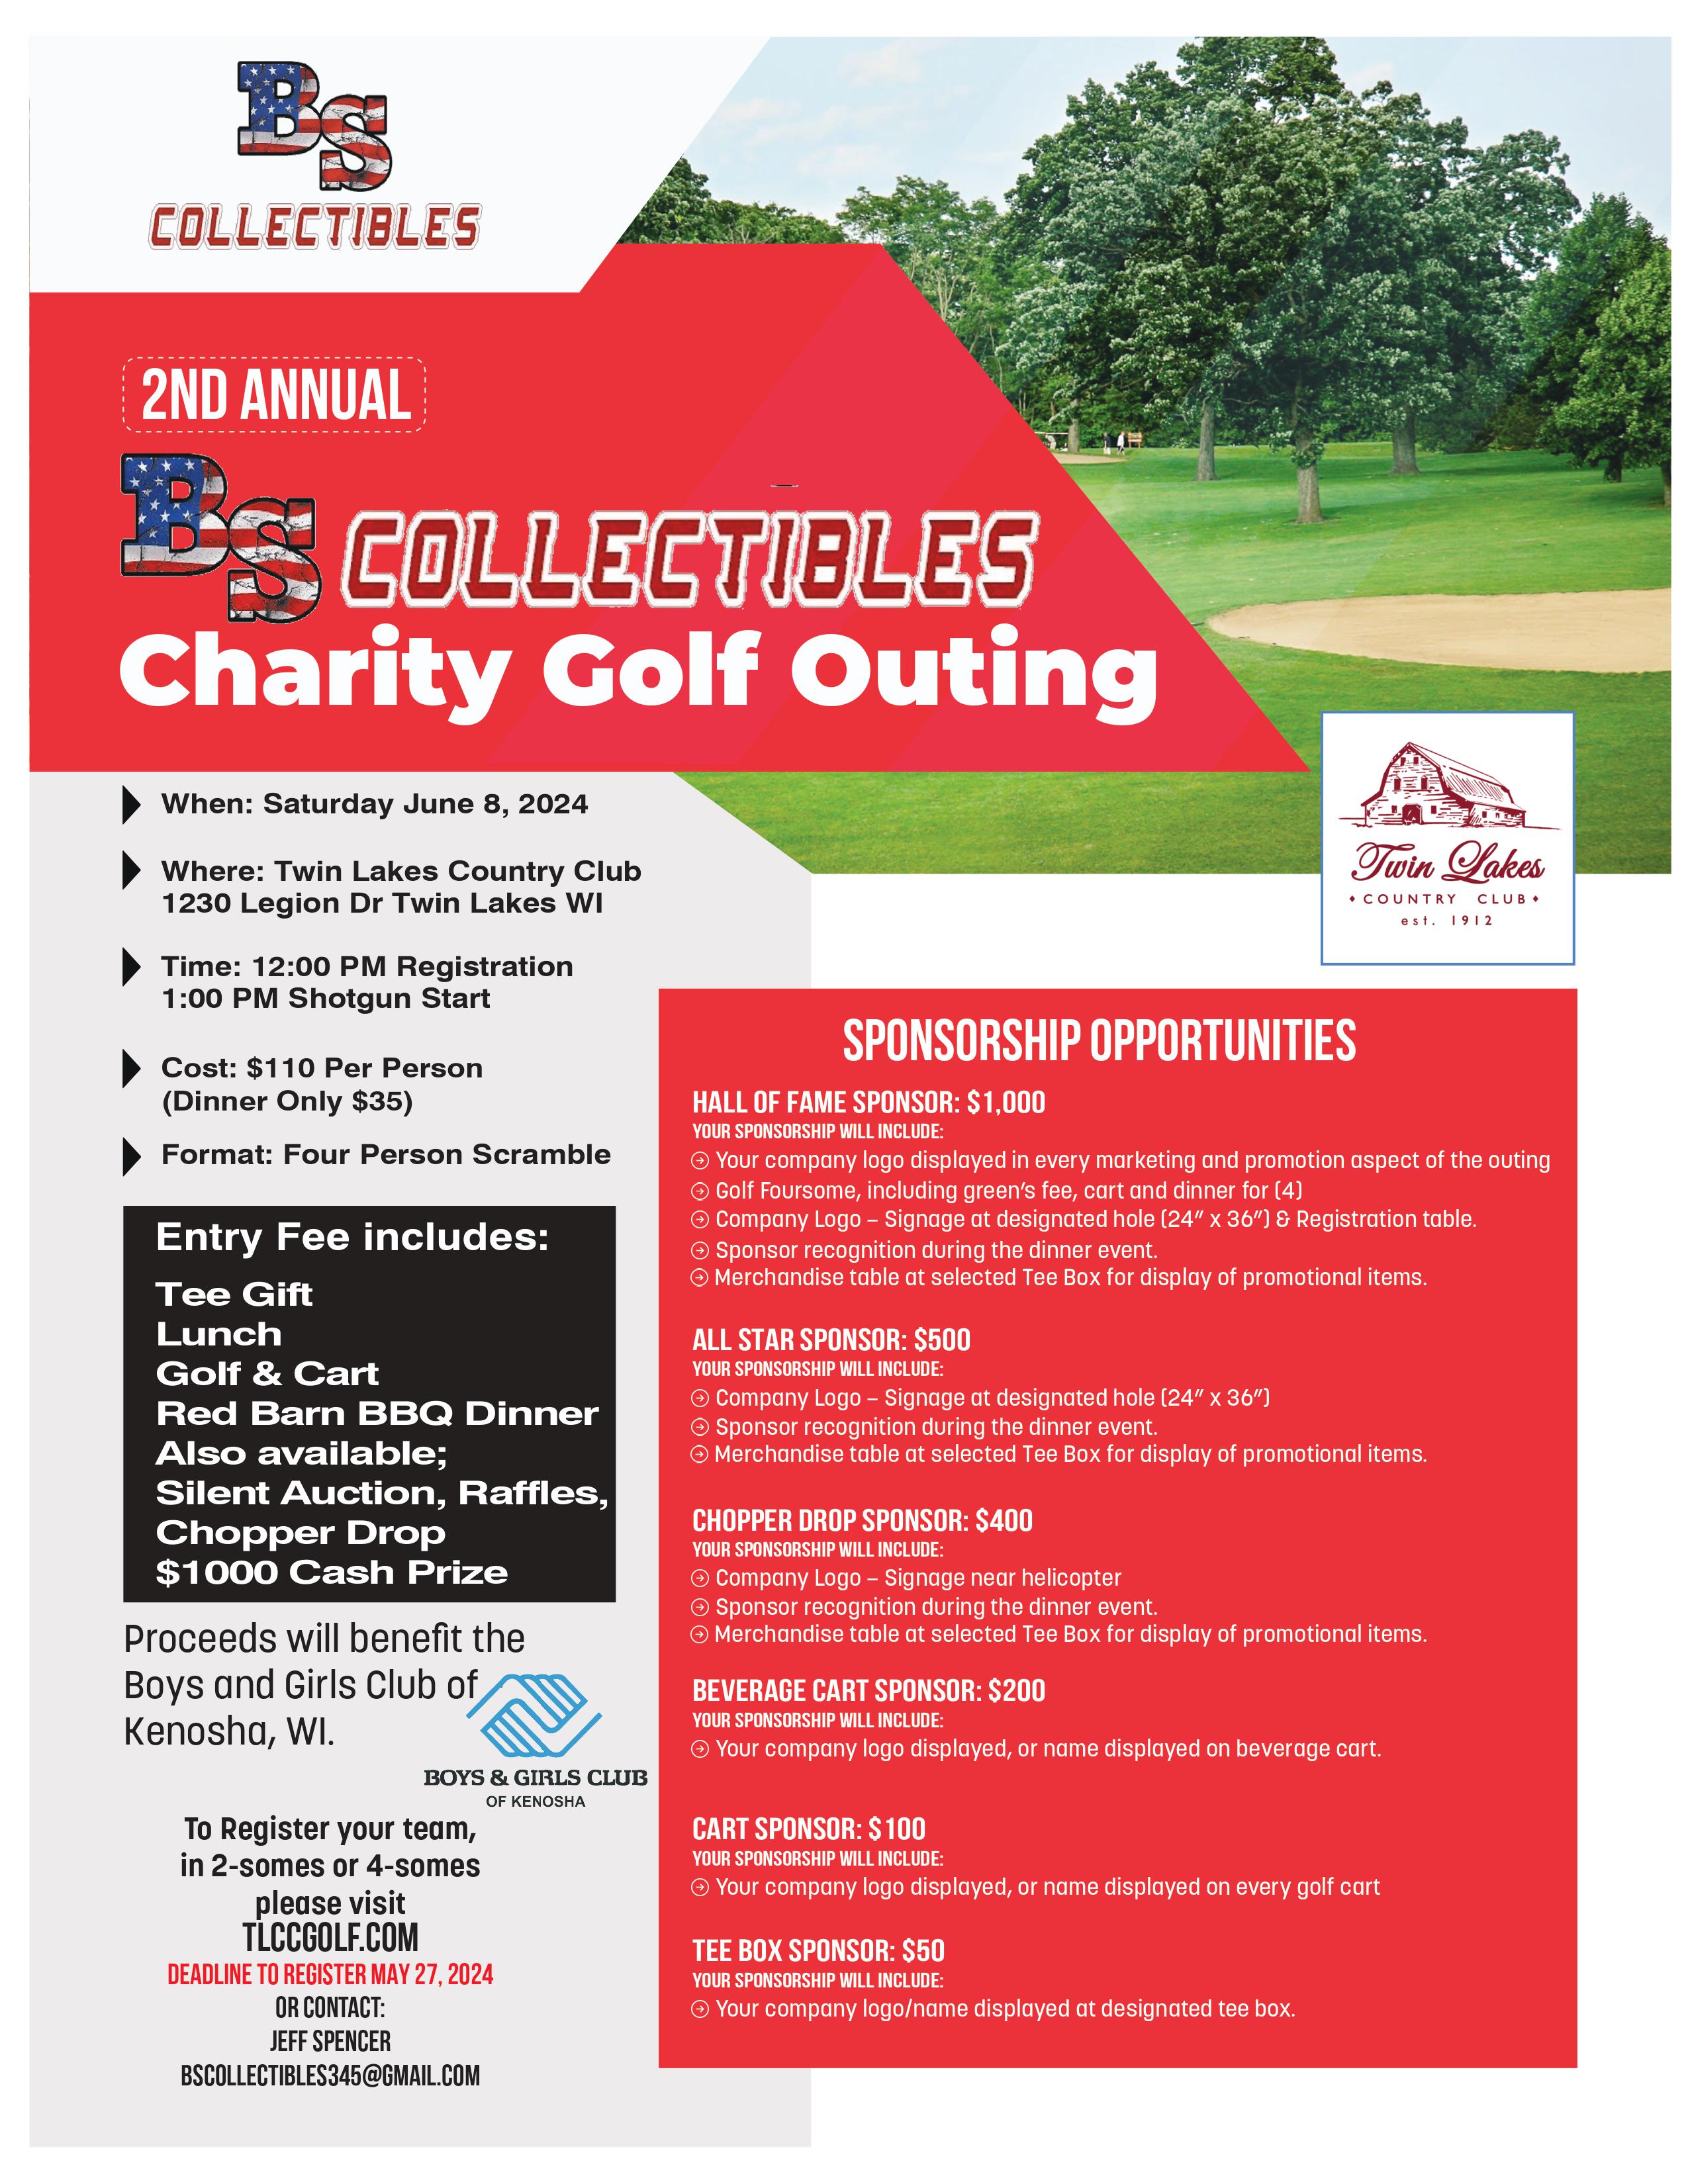 2nd Annual BS Collectibles Charity Golf Outing